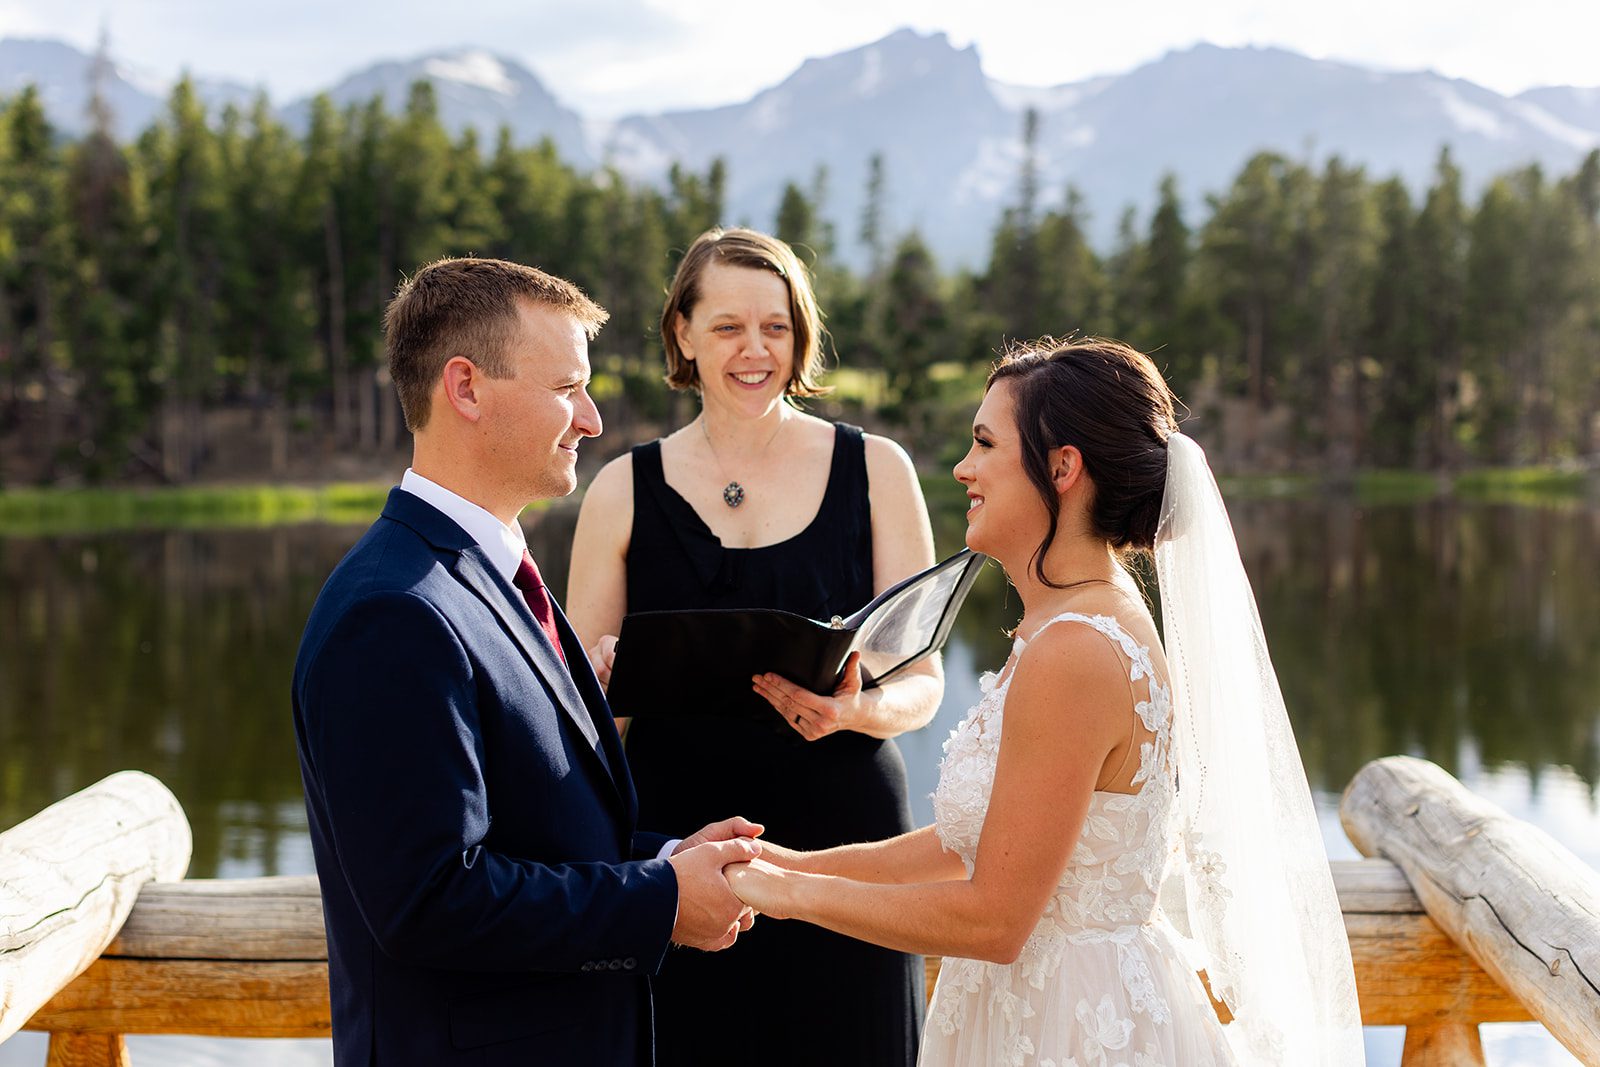 Bride and groom with officiant at Sprague Lake during summer elopement ceremony